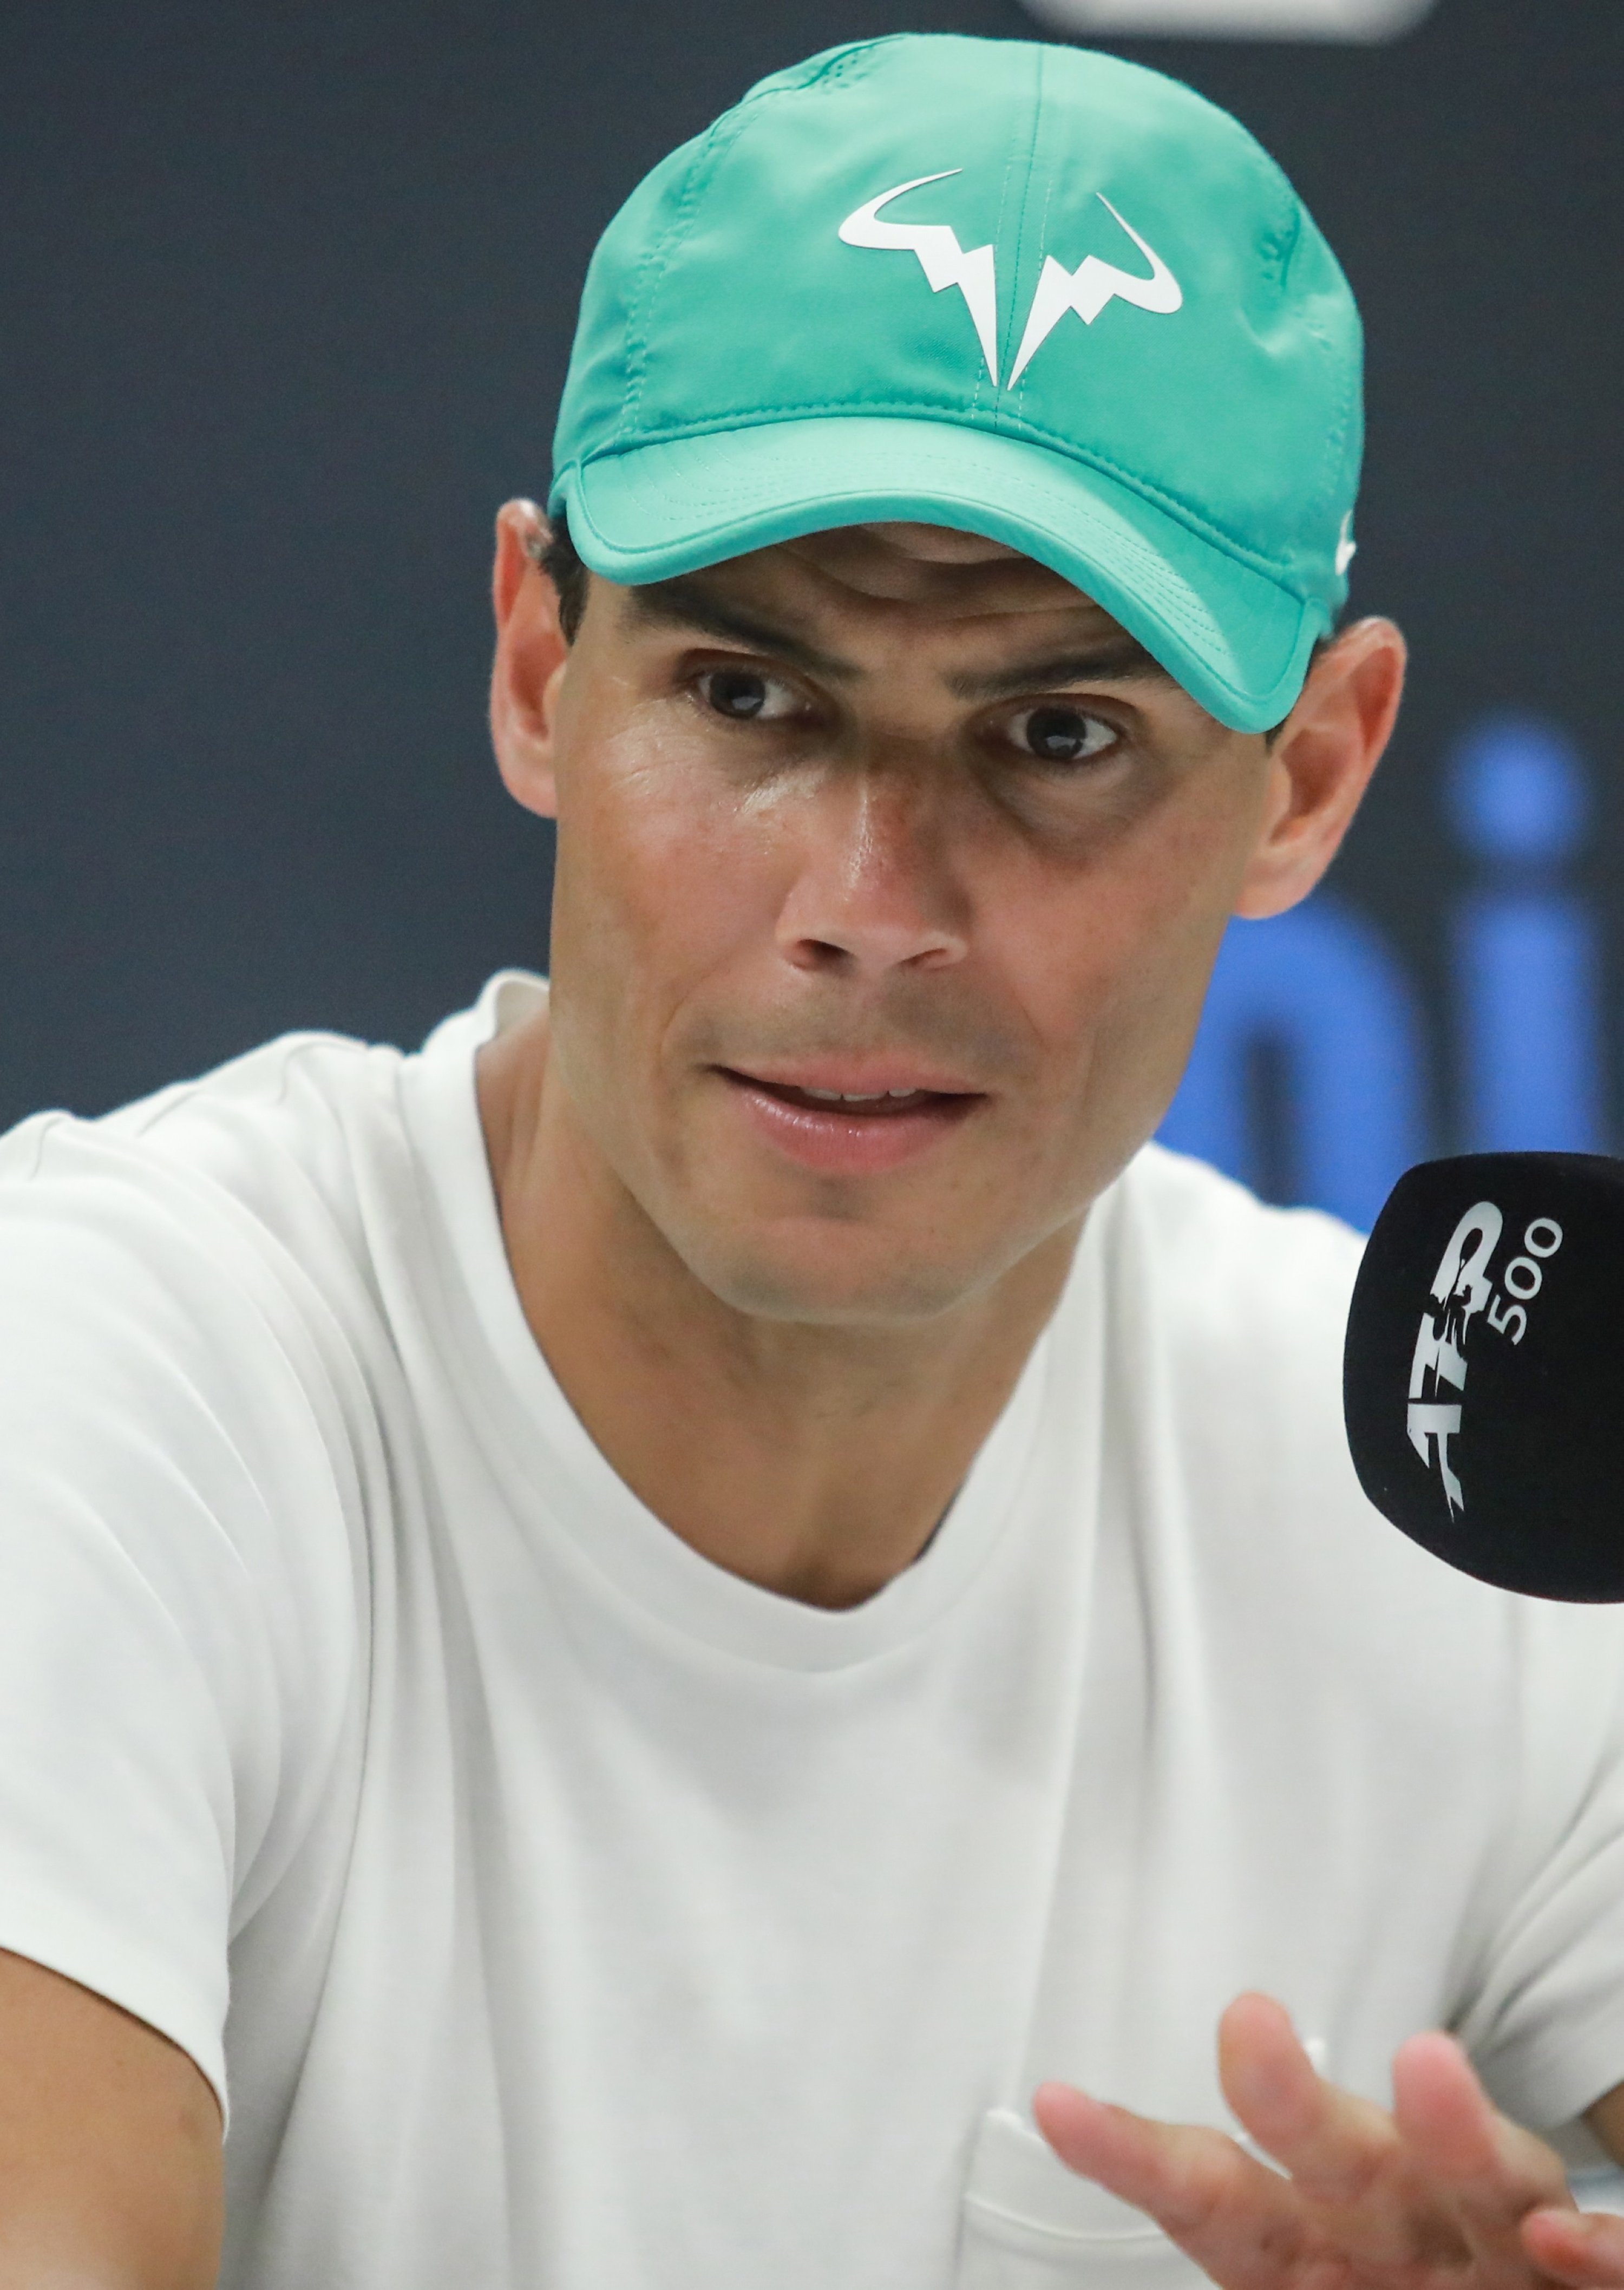 Rafael Nadal speaks at a press conference prior to the Mexican Tennis Open, Acapulco, Mexico, Feb. 20, 2022. (EPA Photo)